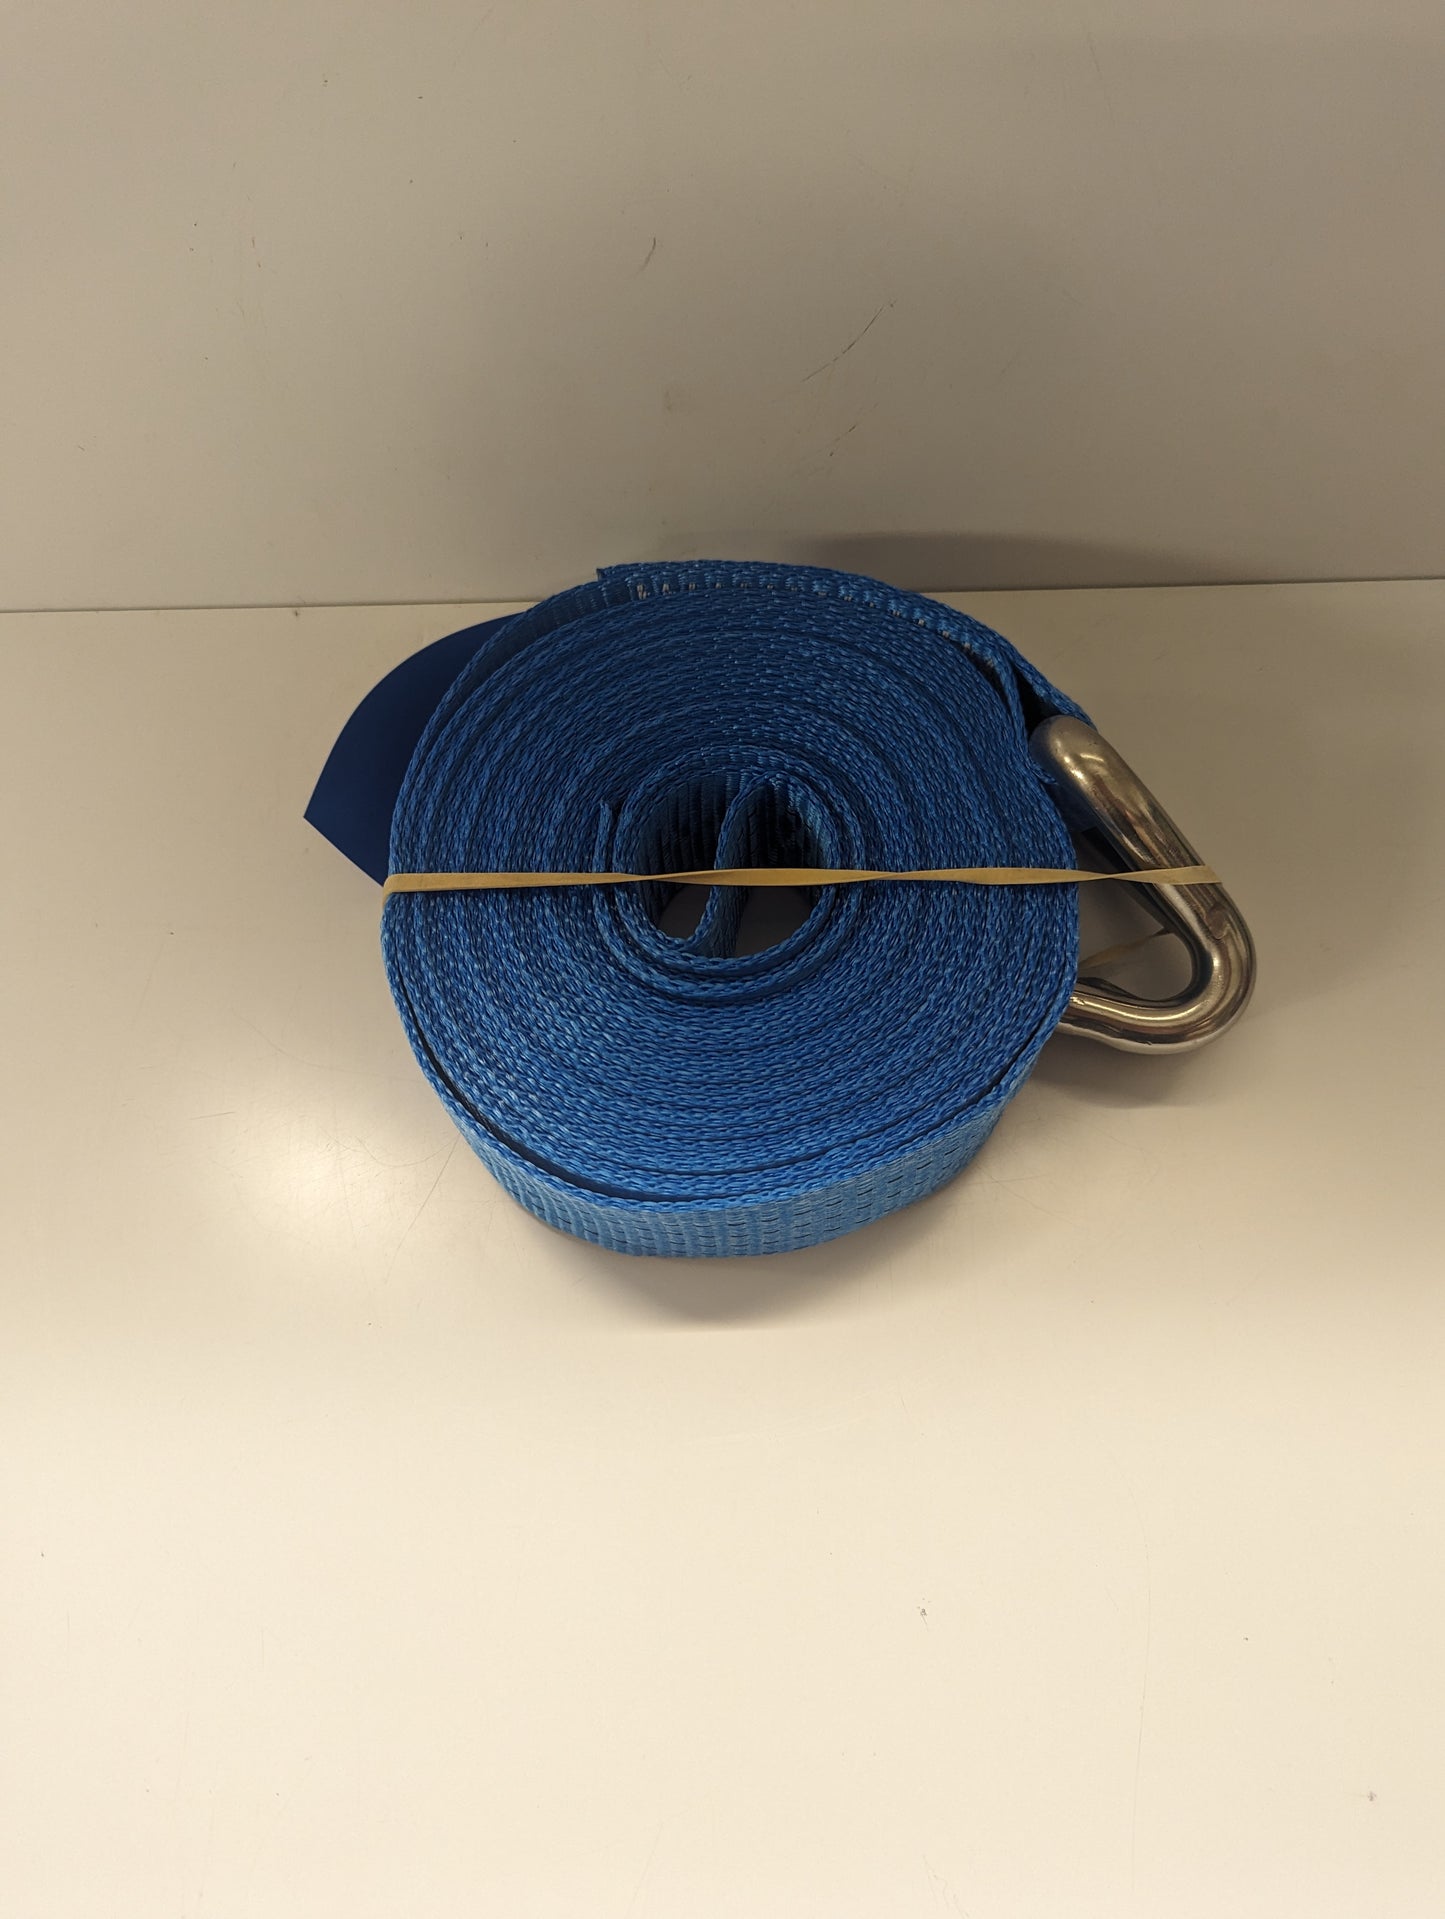 Stainless Steel Ratchet Straps 50mm x 8m with Claw Hooks